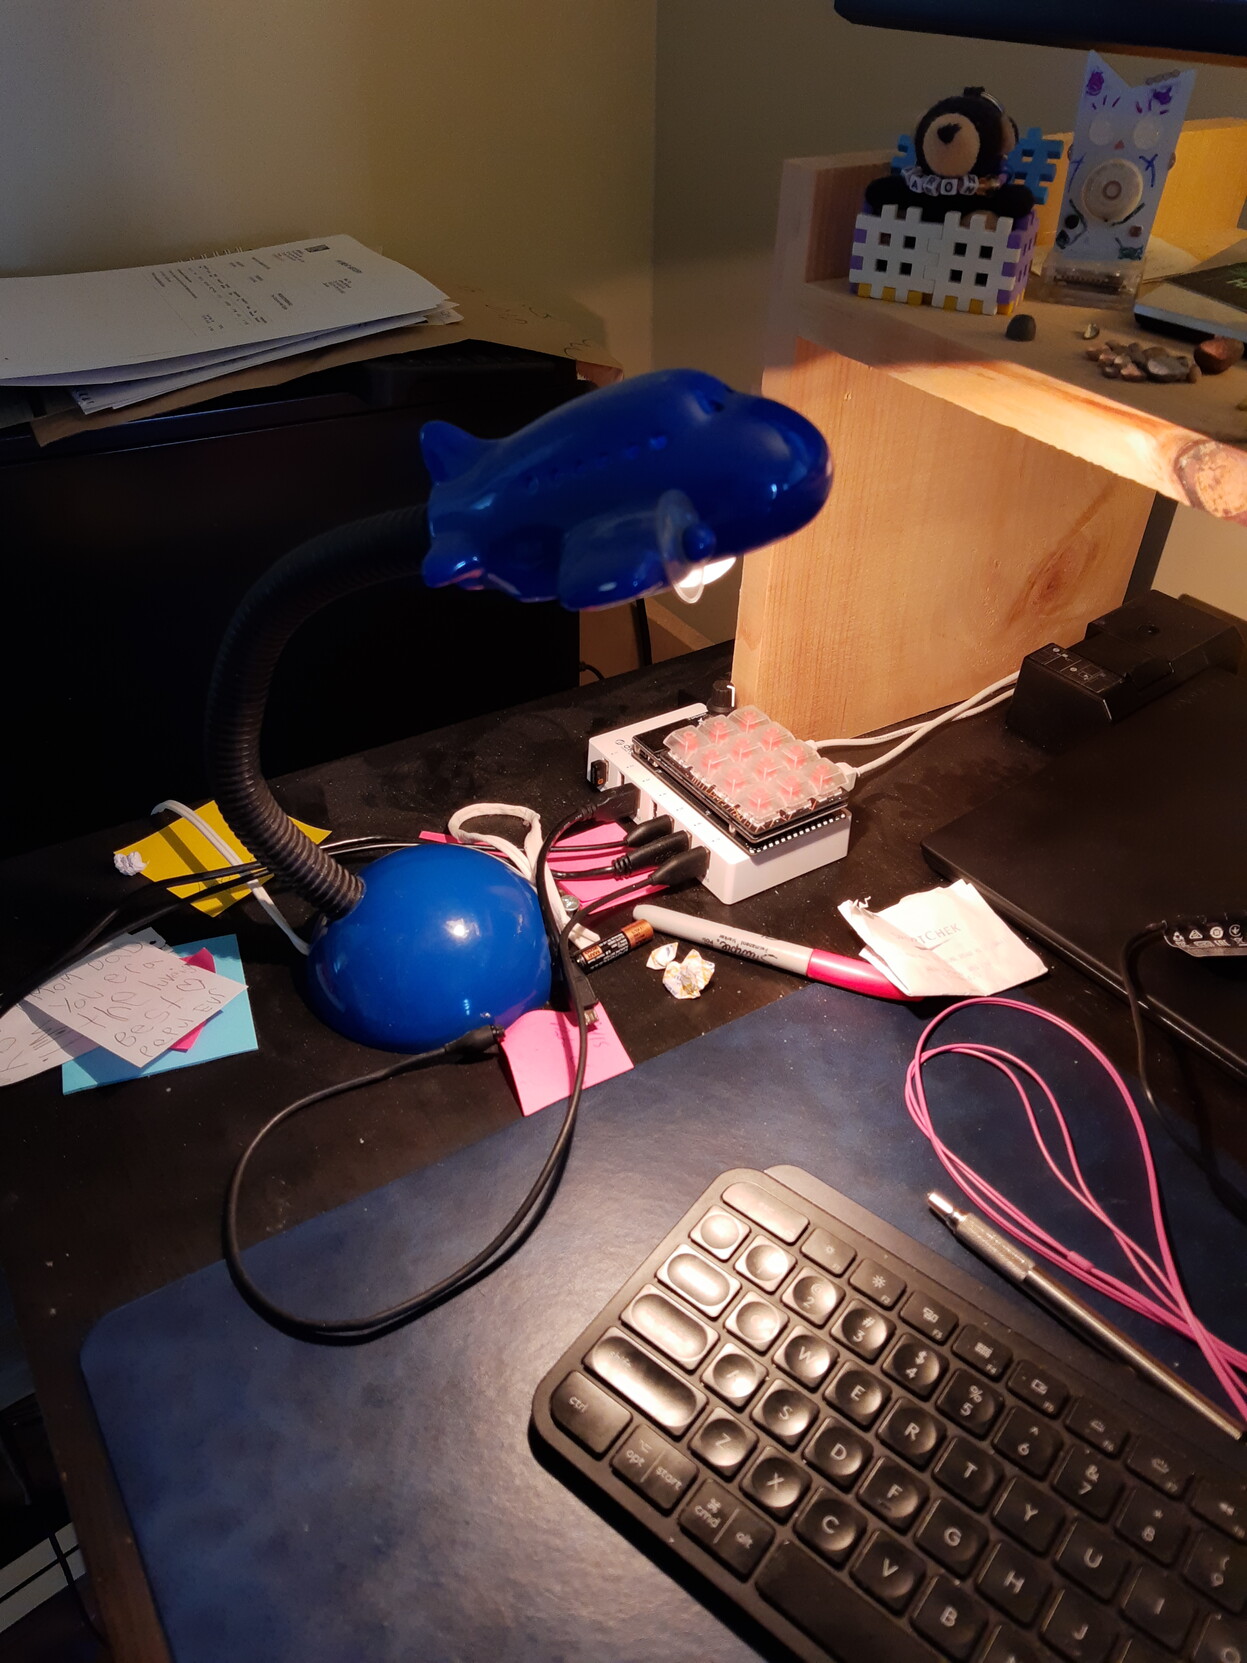 Blue airplane-shaped lamp on a black bendy arm over a blue lamp base. Has a little 25w incandescent bulb in it. It's lighting up my very messy desk.